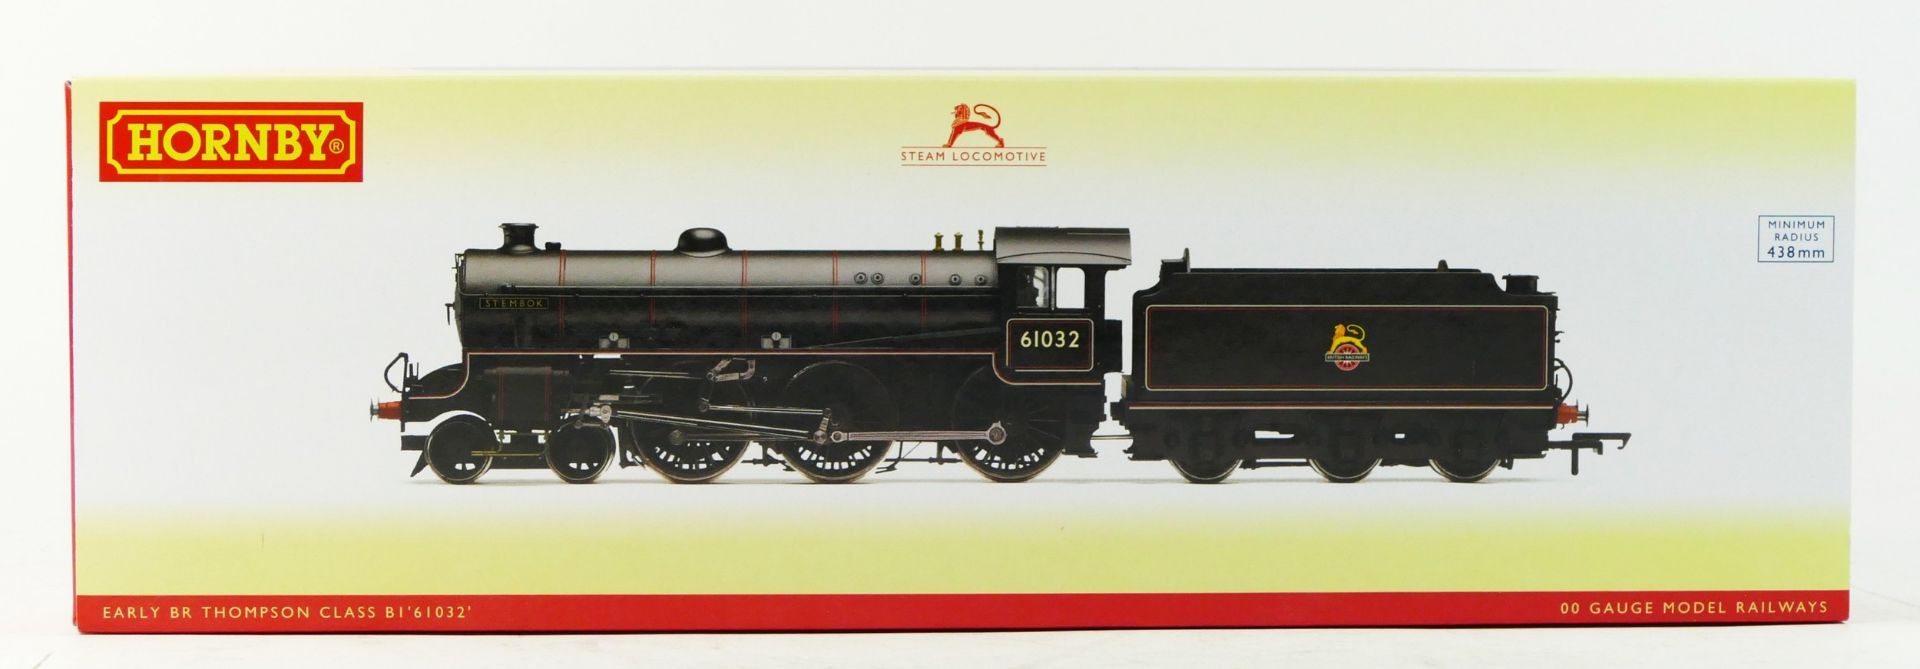 OO gauge, Hornby locomotive with tender (R3451) to include a BR Thompson class BI ‘61032’ loco in BR